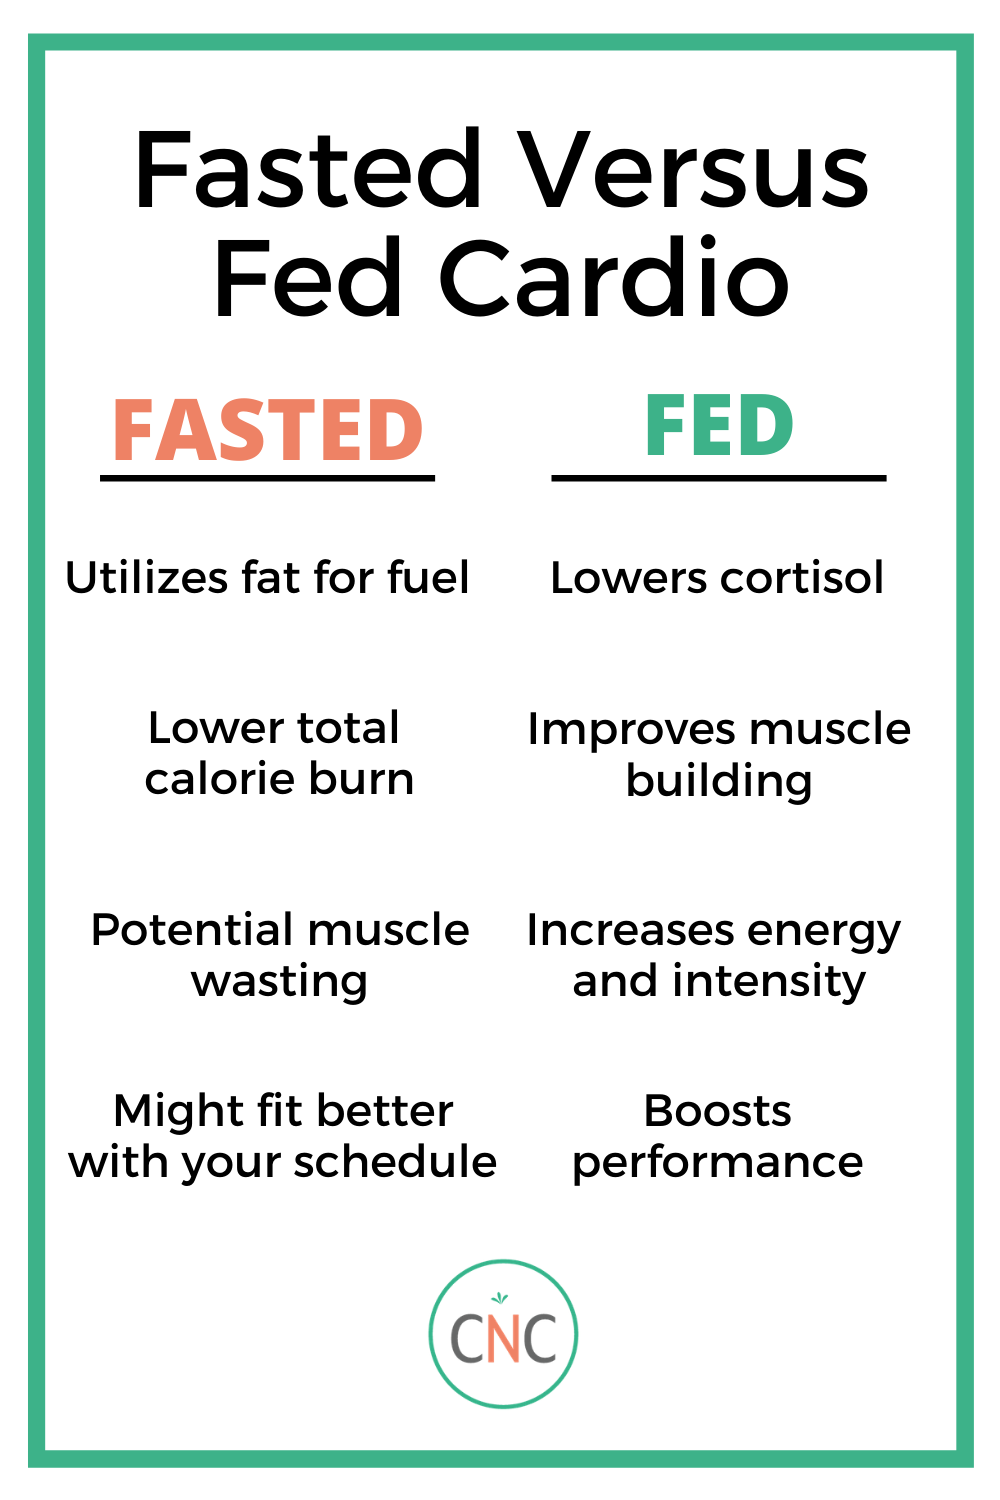 Fasted Versus Fed Cardio - Carrots 'N' Cake